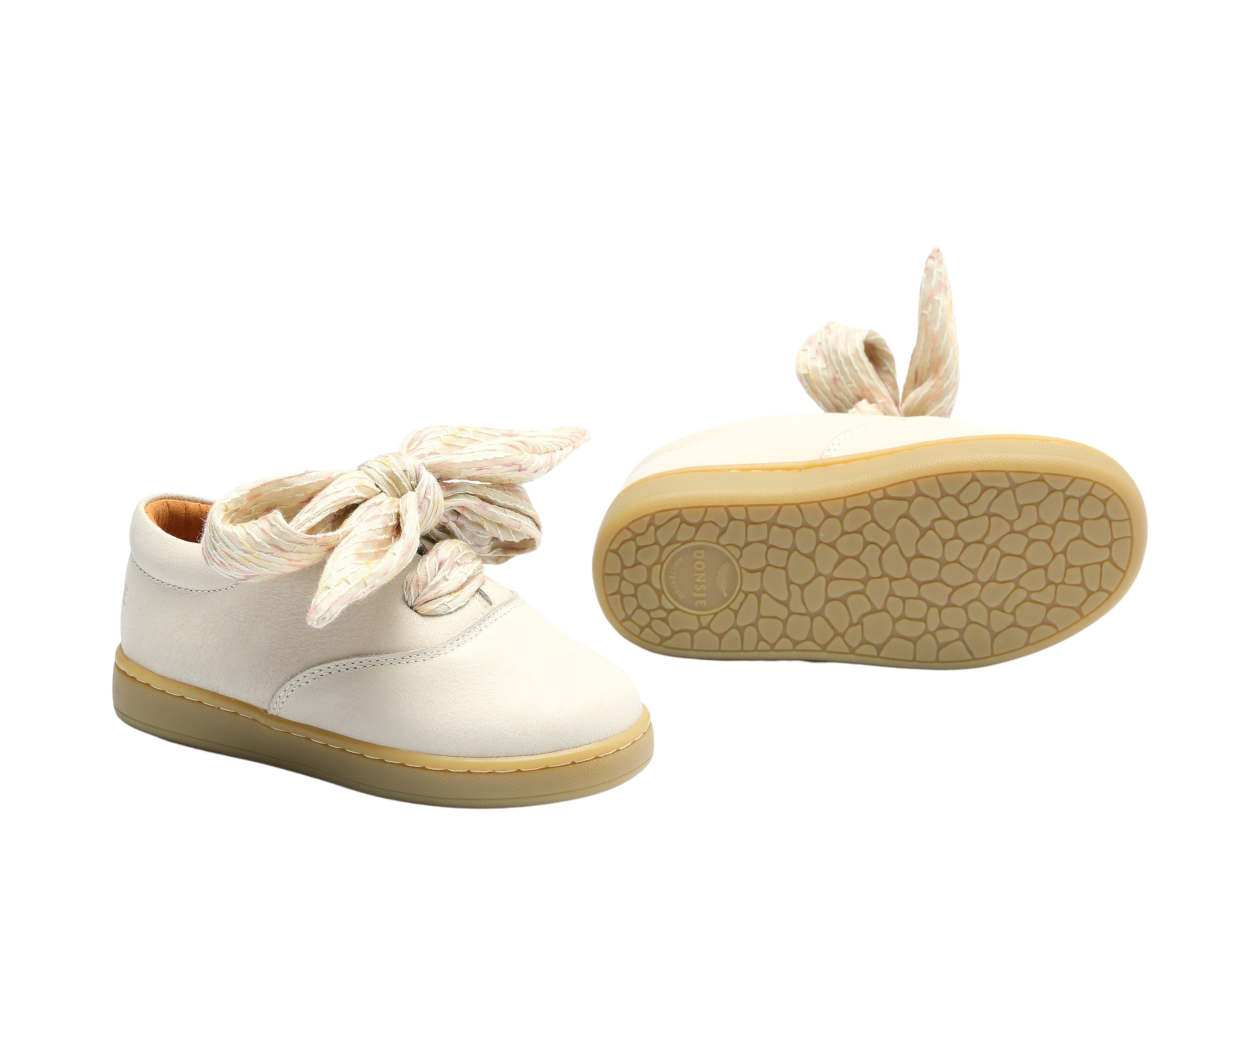 Meilly | Cream Leather